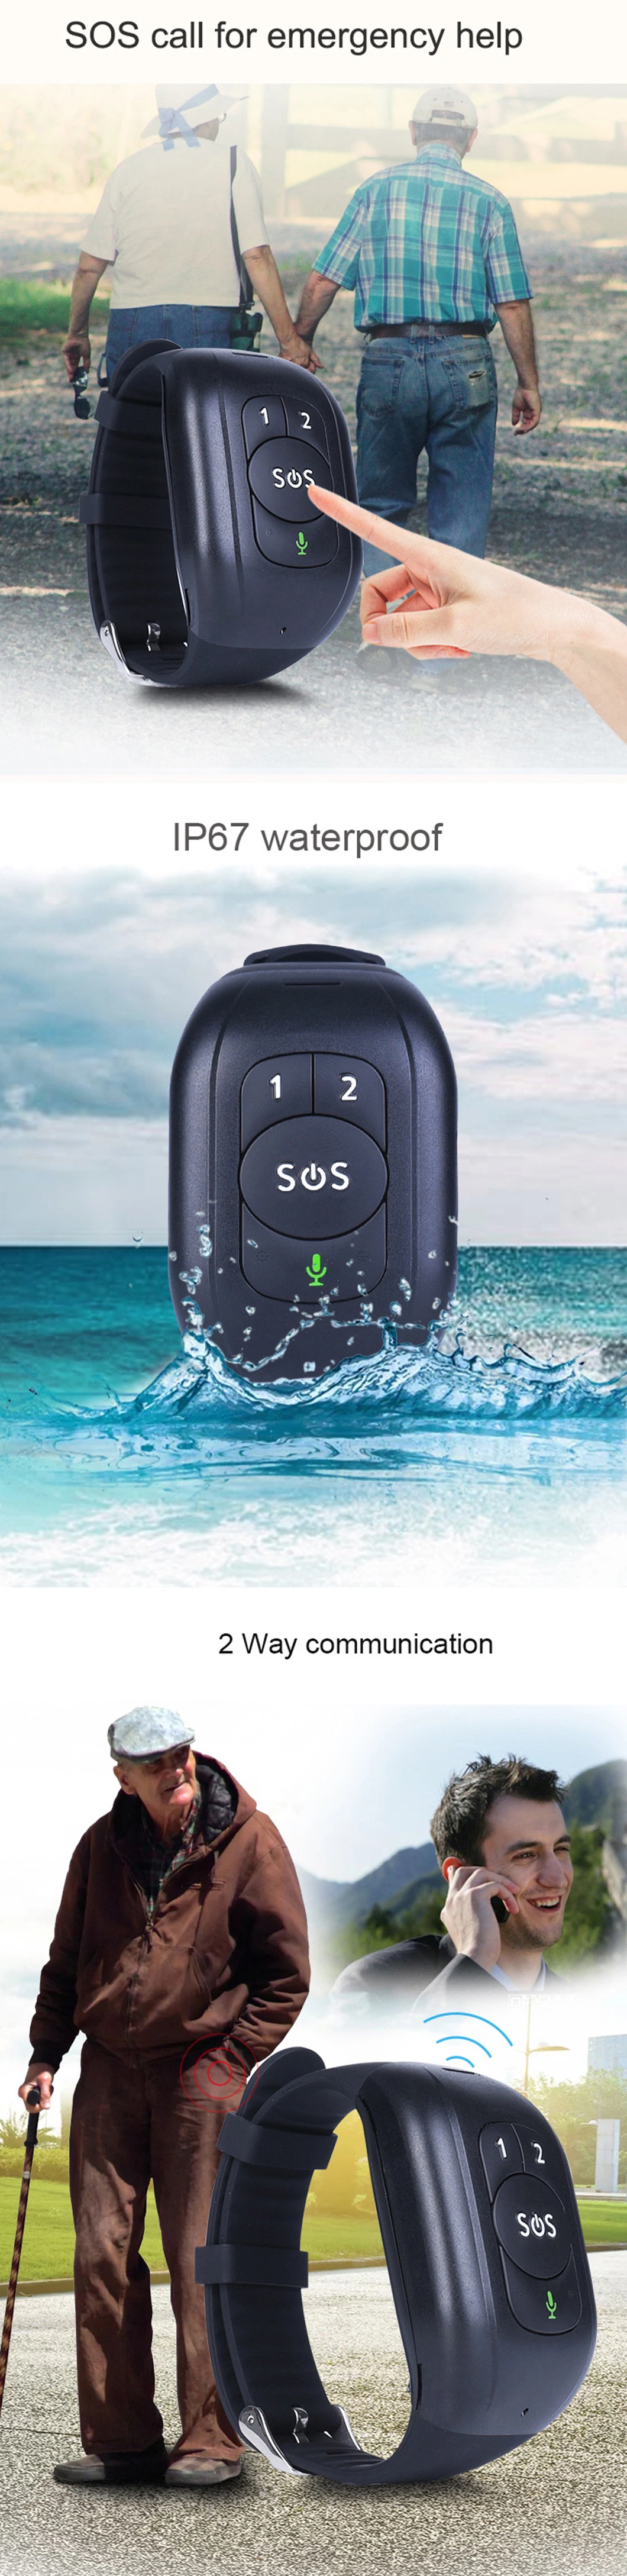 New Developed 4G LTE IP67 Waterproof Removal Alert Smart Tracker Device GPS with Fall Down Alarm Alert Body Temperature Y6T